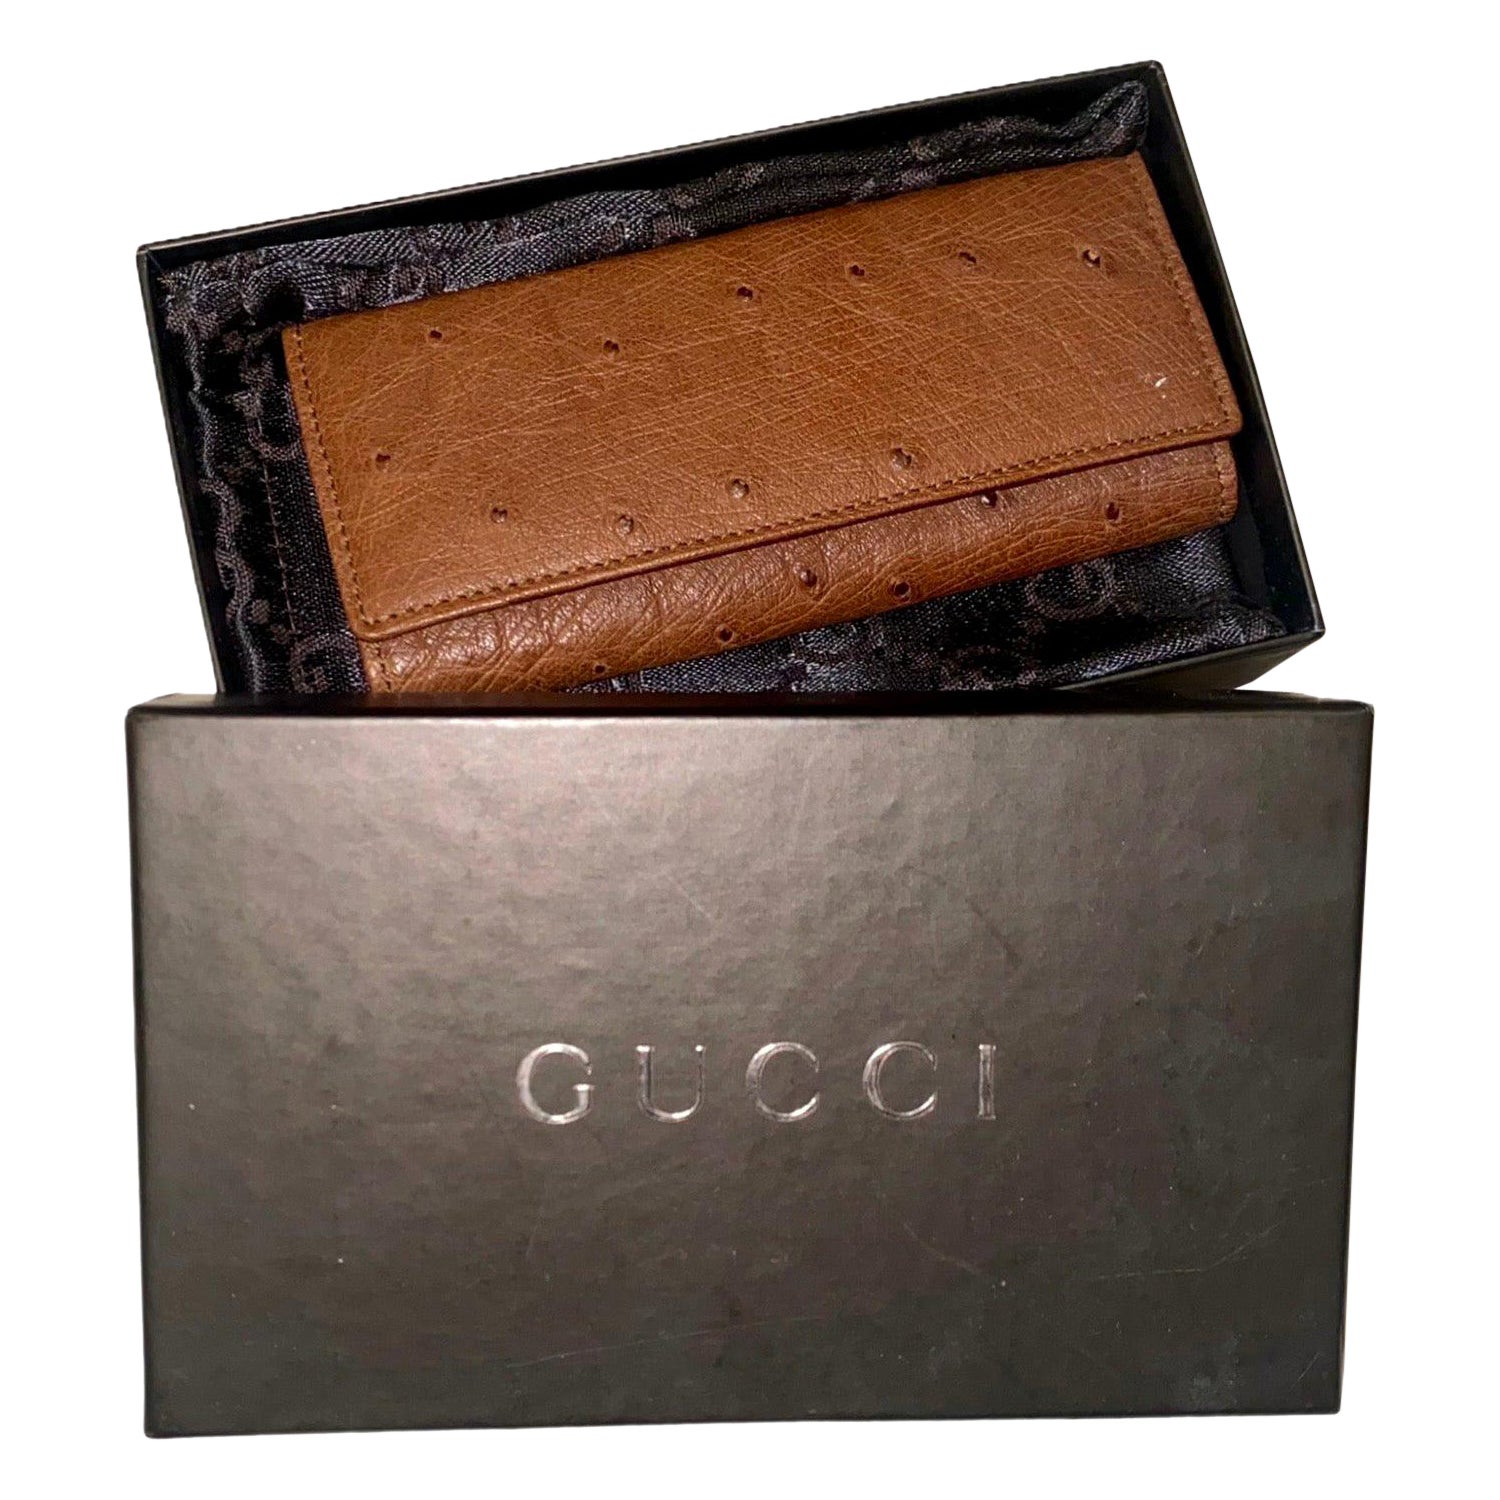 Do old Gucci bags have serial numbers?